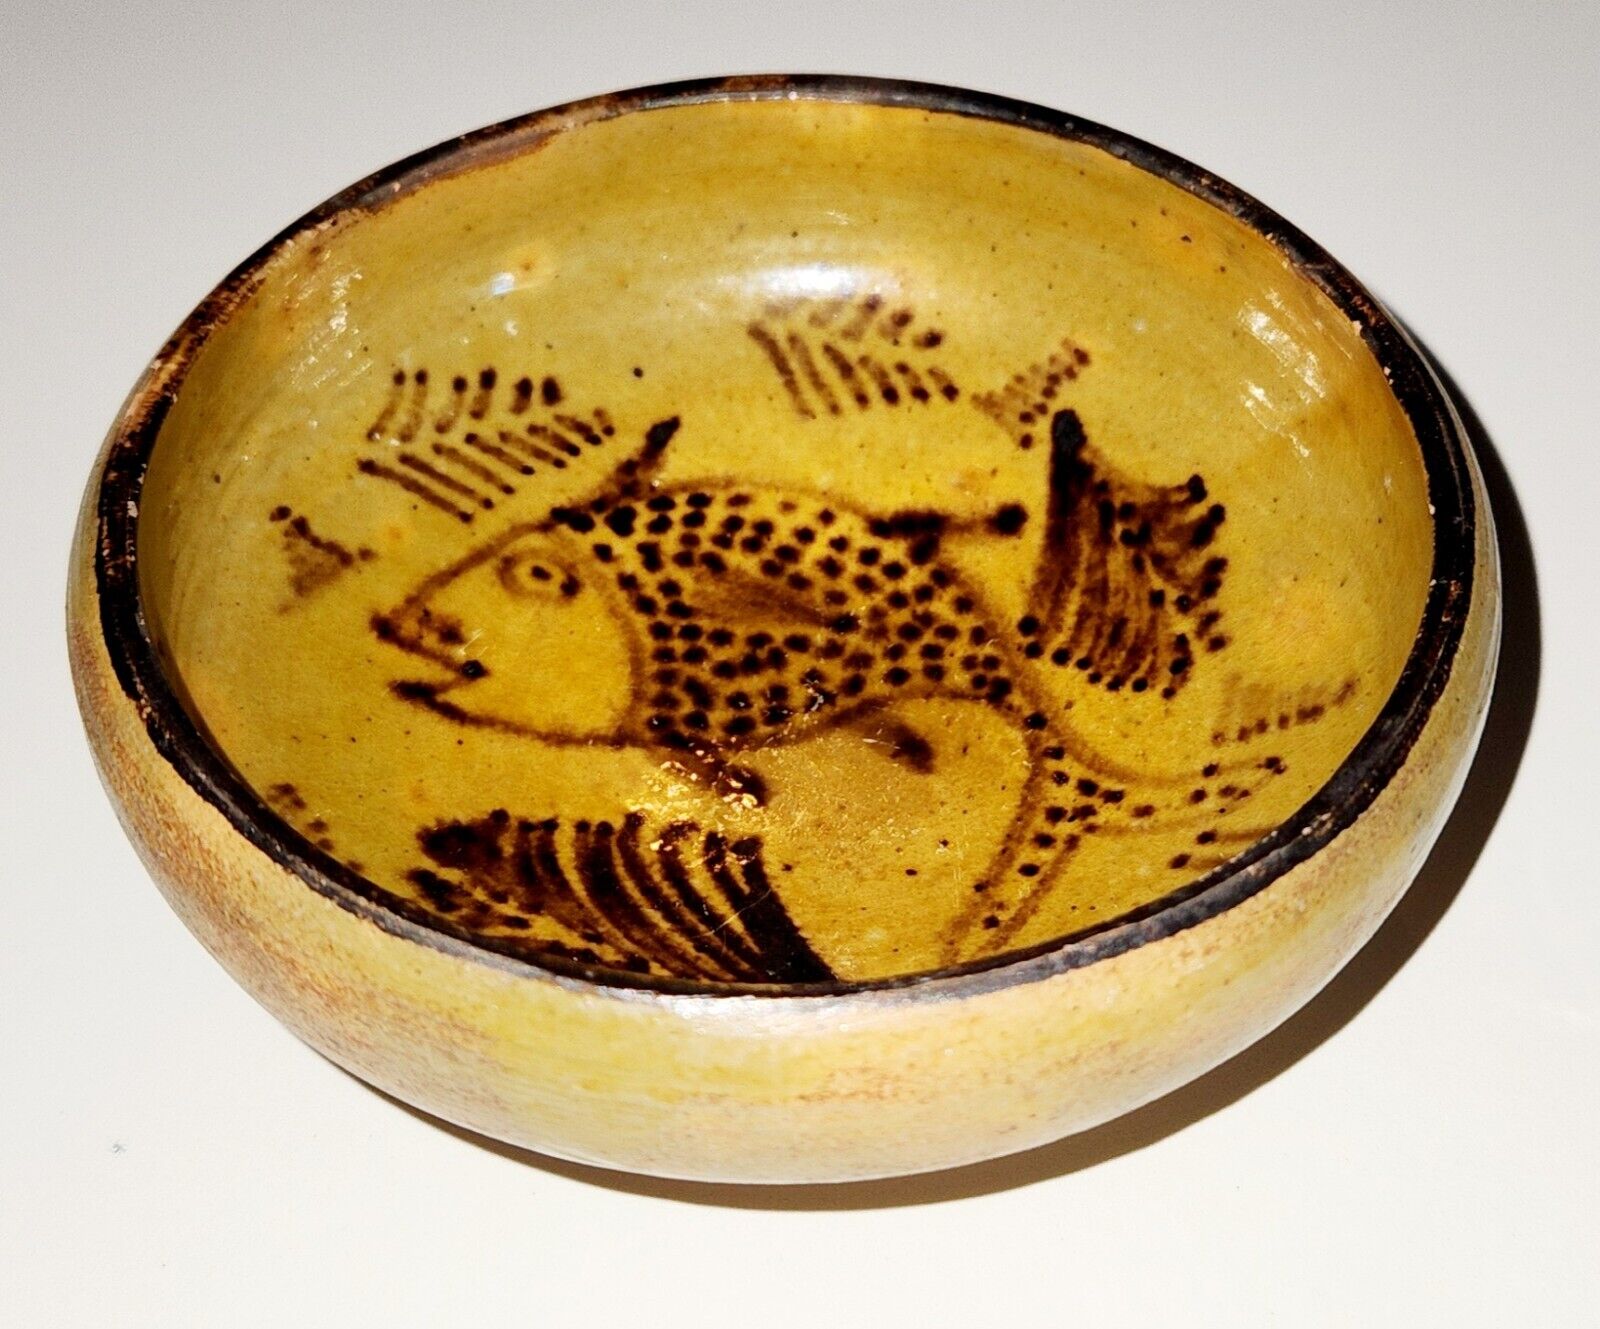 Vintage Miniature Clay Bowl With Hand Painted Fish Design